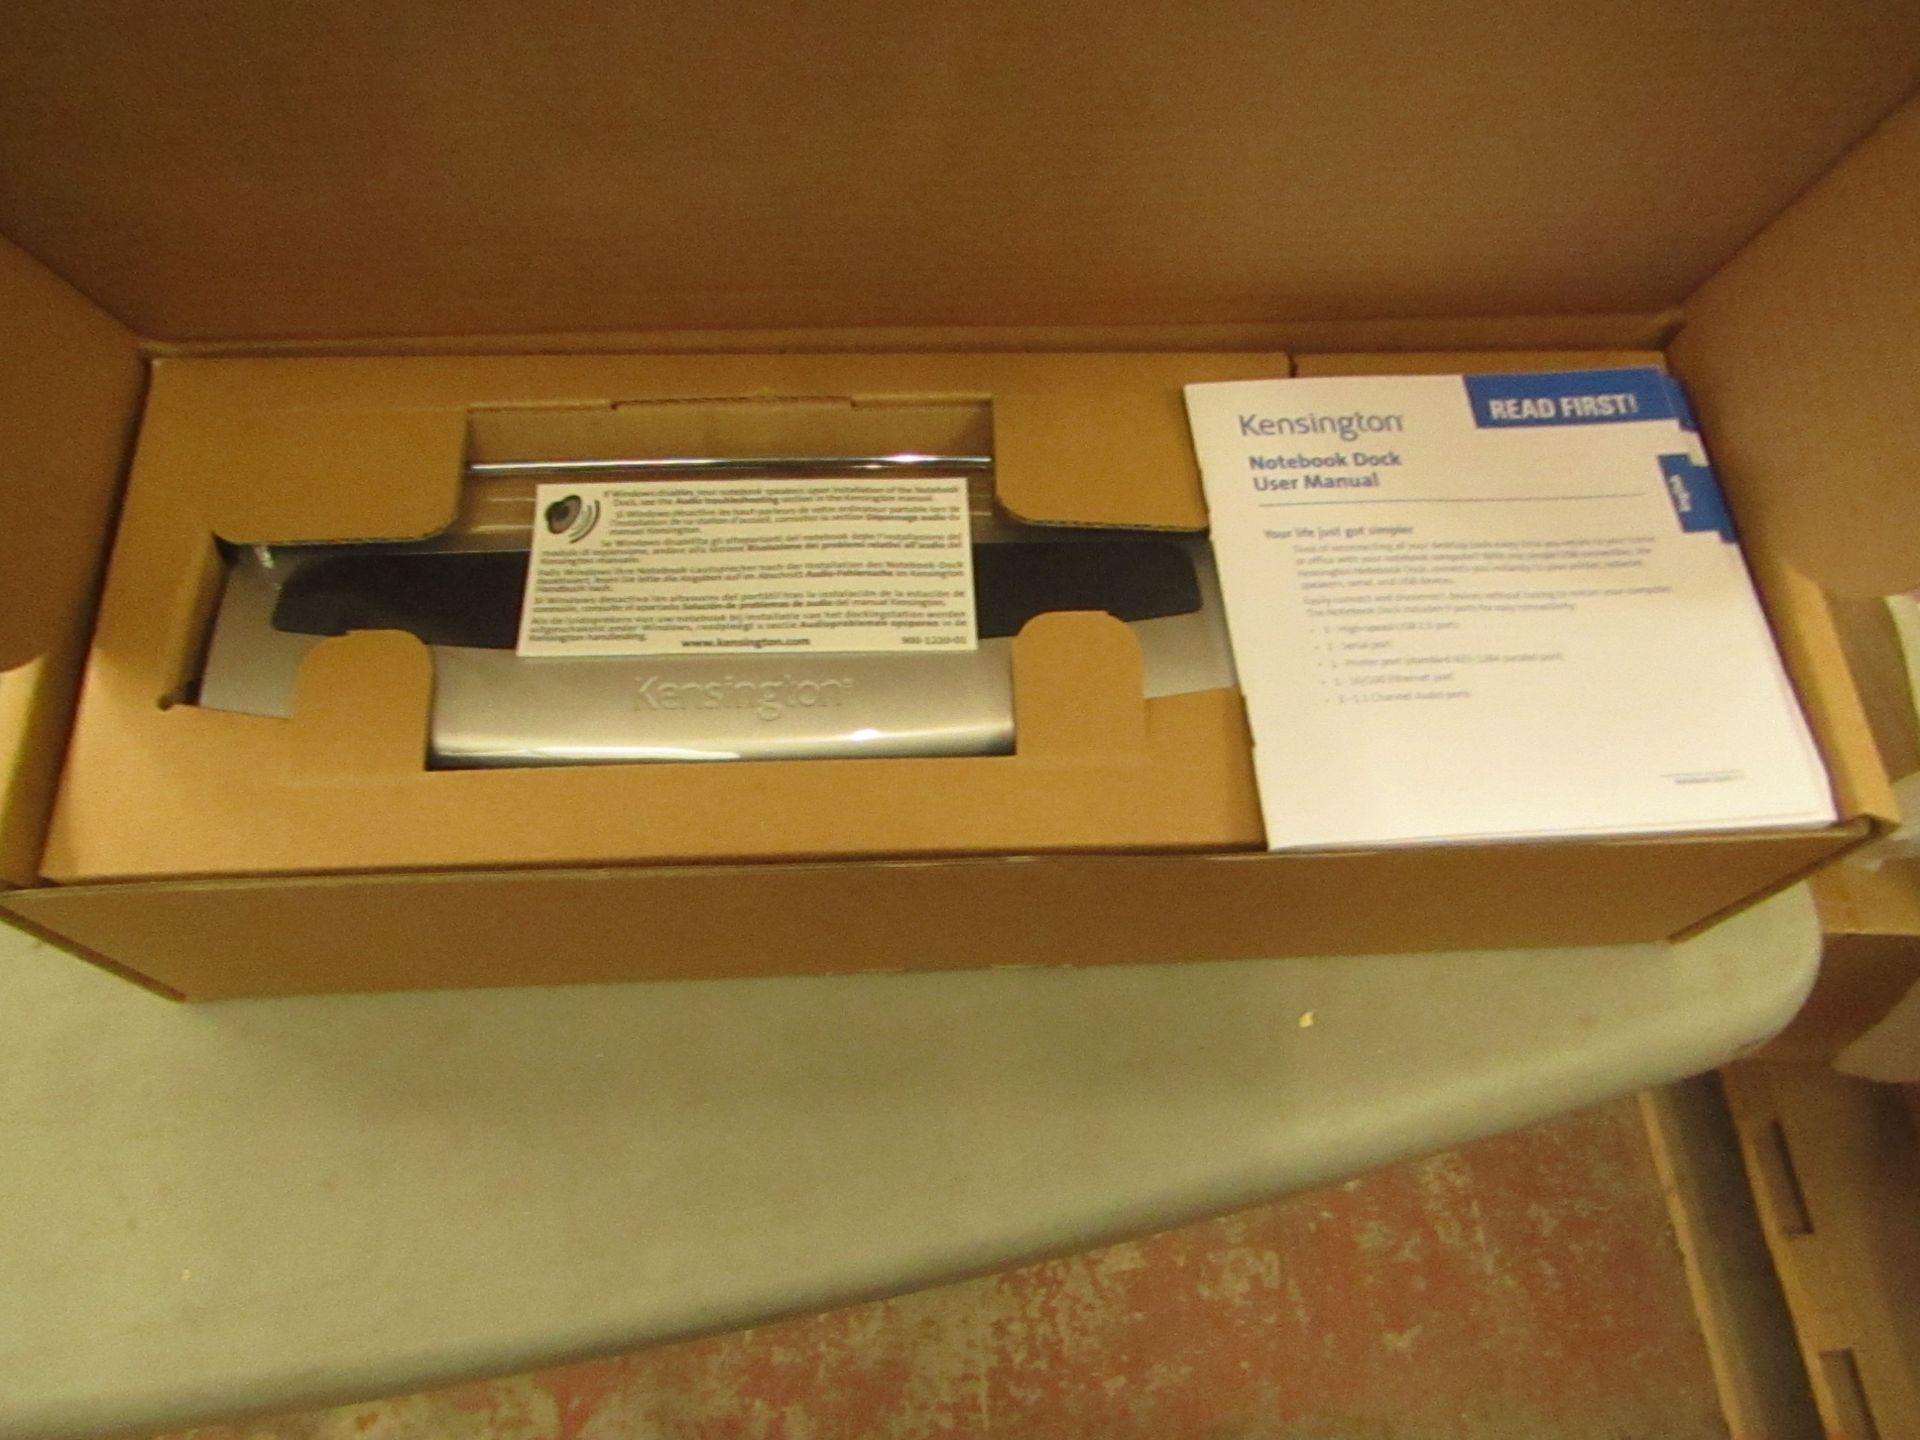 3x Kensington - Notebook Dock With Adjustable Base (EU) - Unchecked & Boxed.